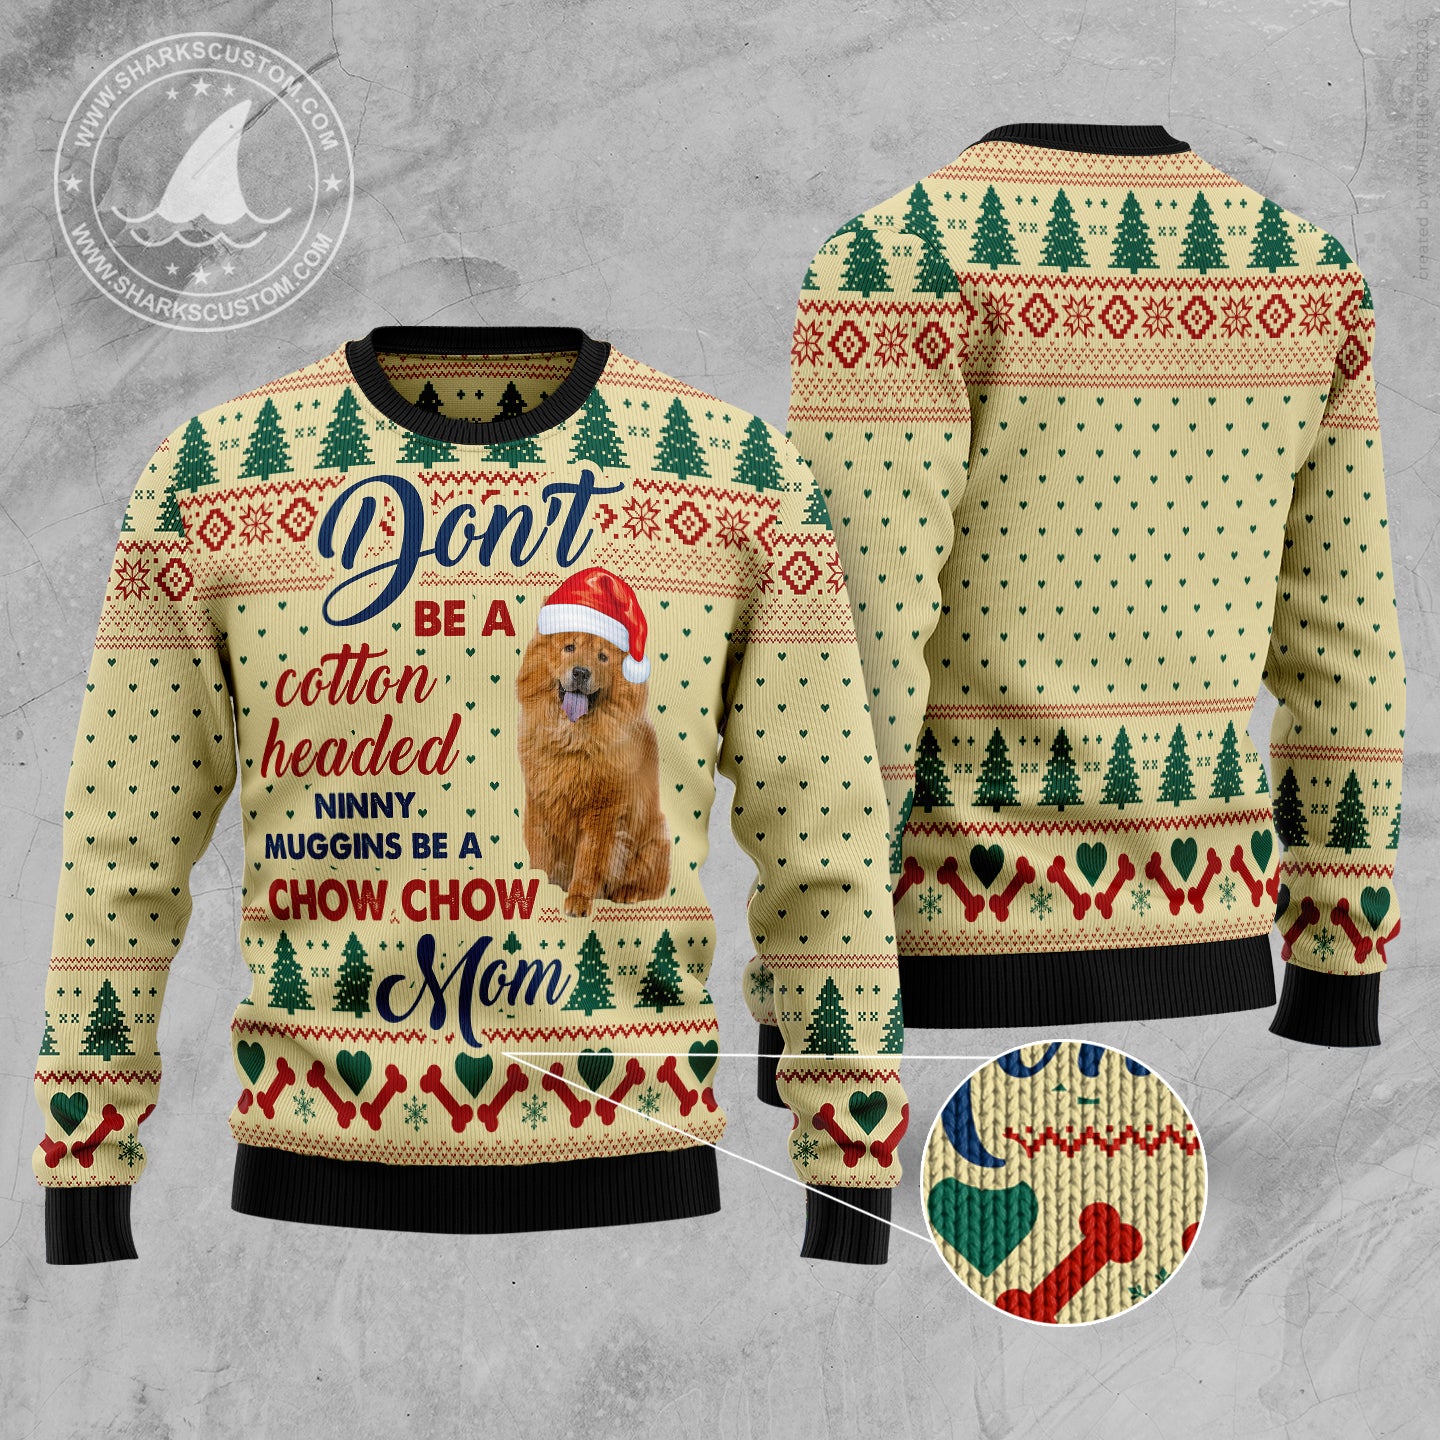 Chow Chow Mom D2610 Ugly Christmas Sweater